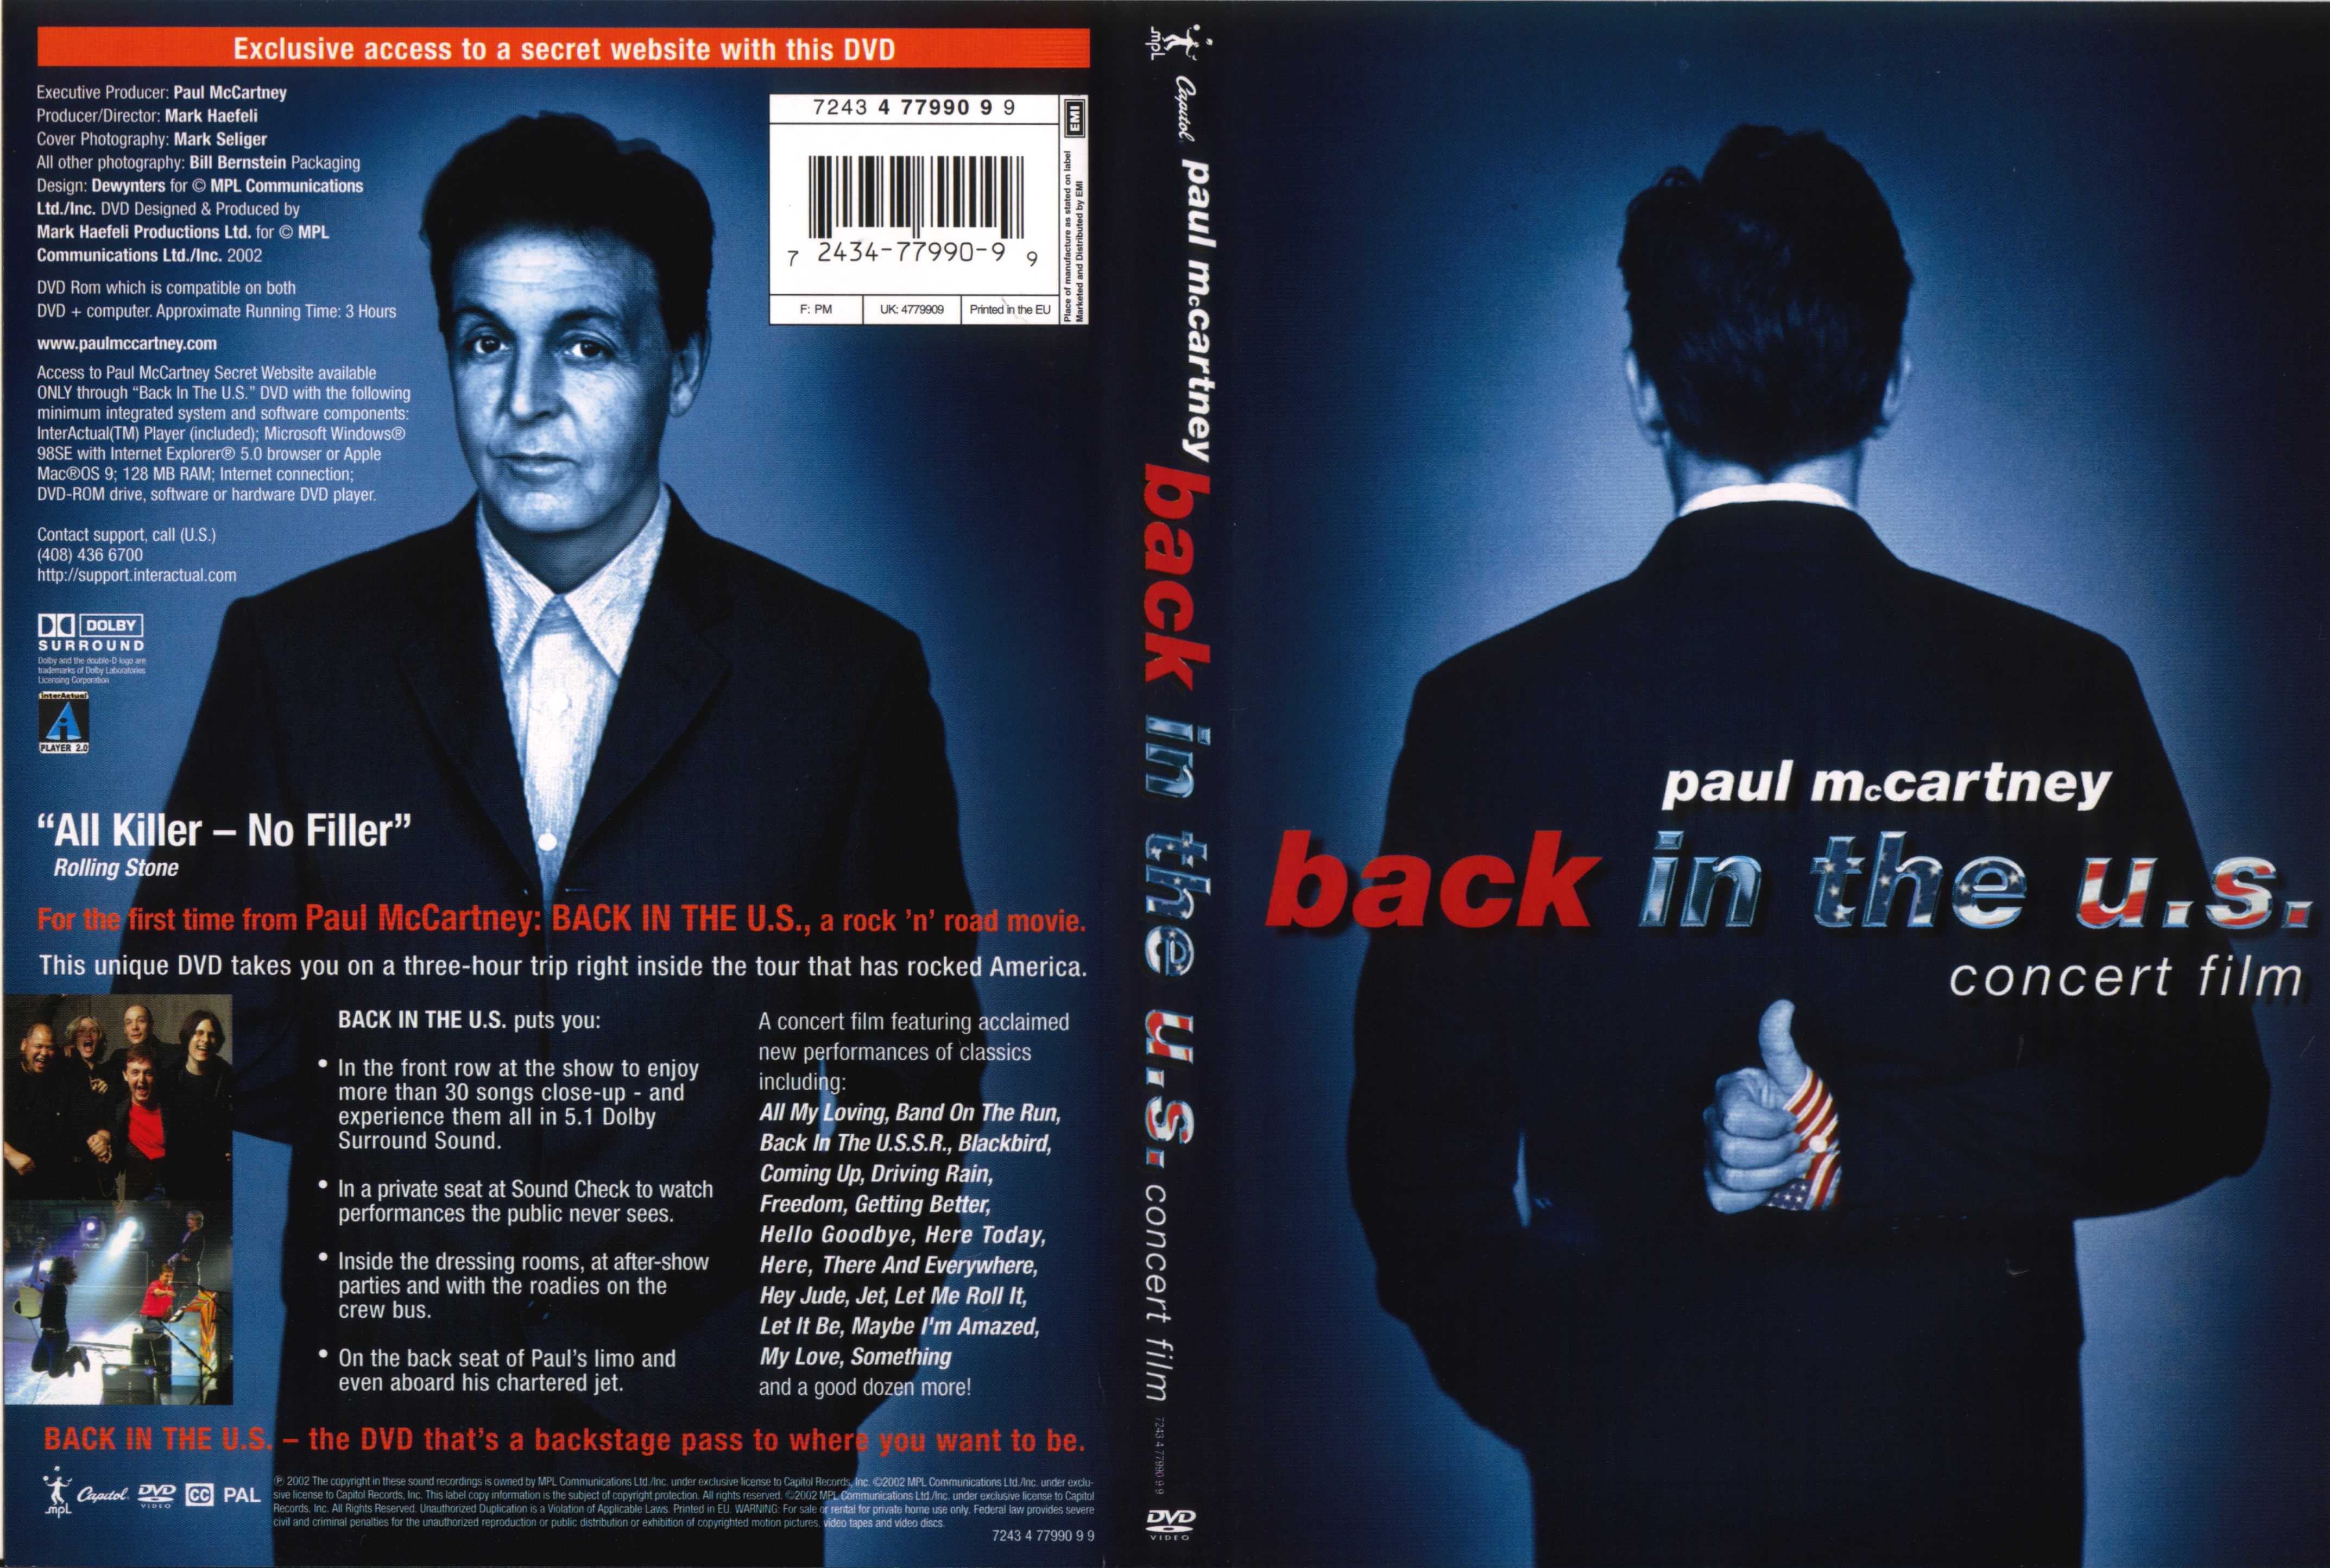 Jaquette DVD Paul McCartney back in the us concert film